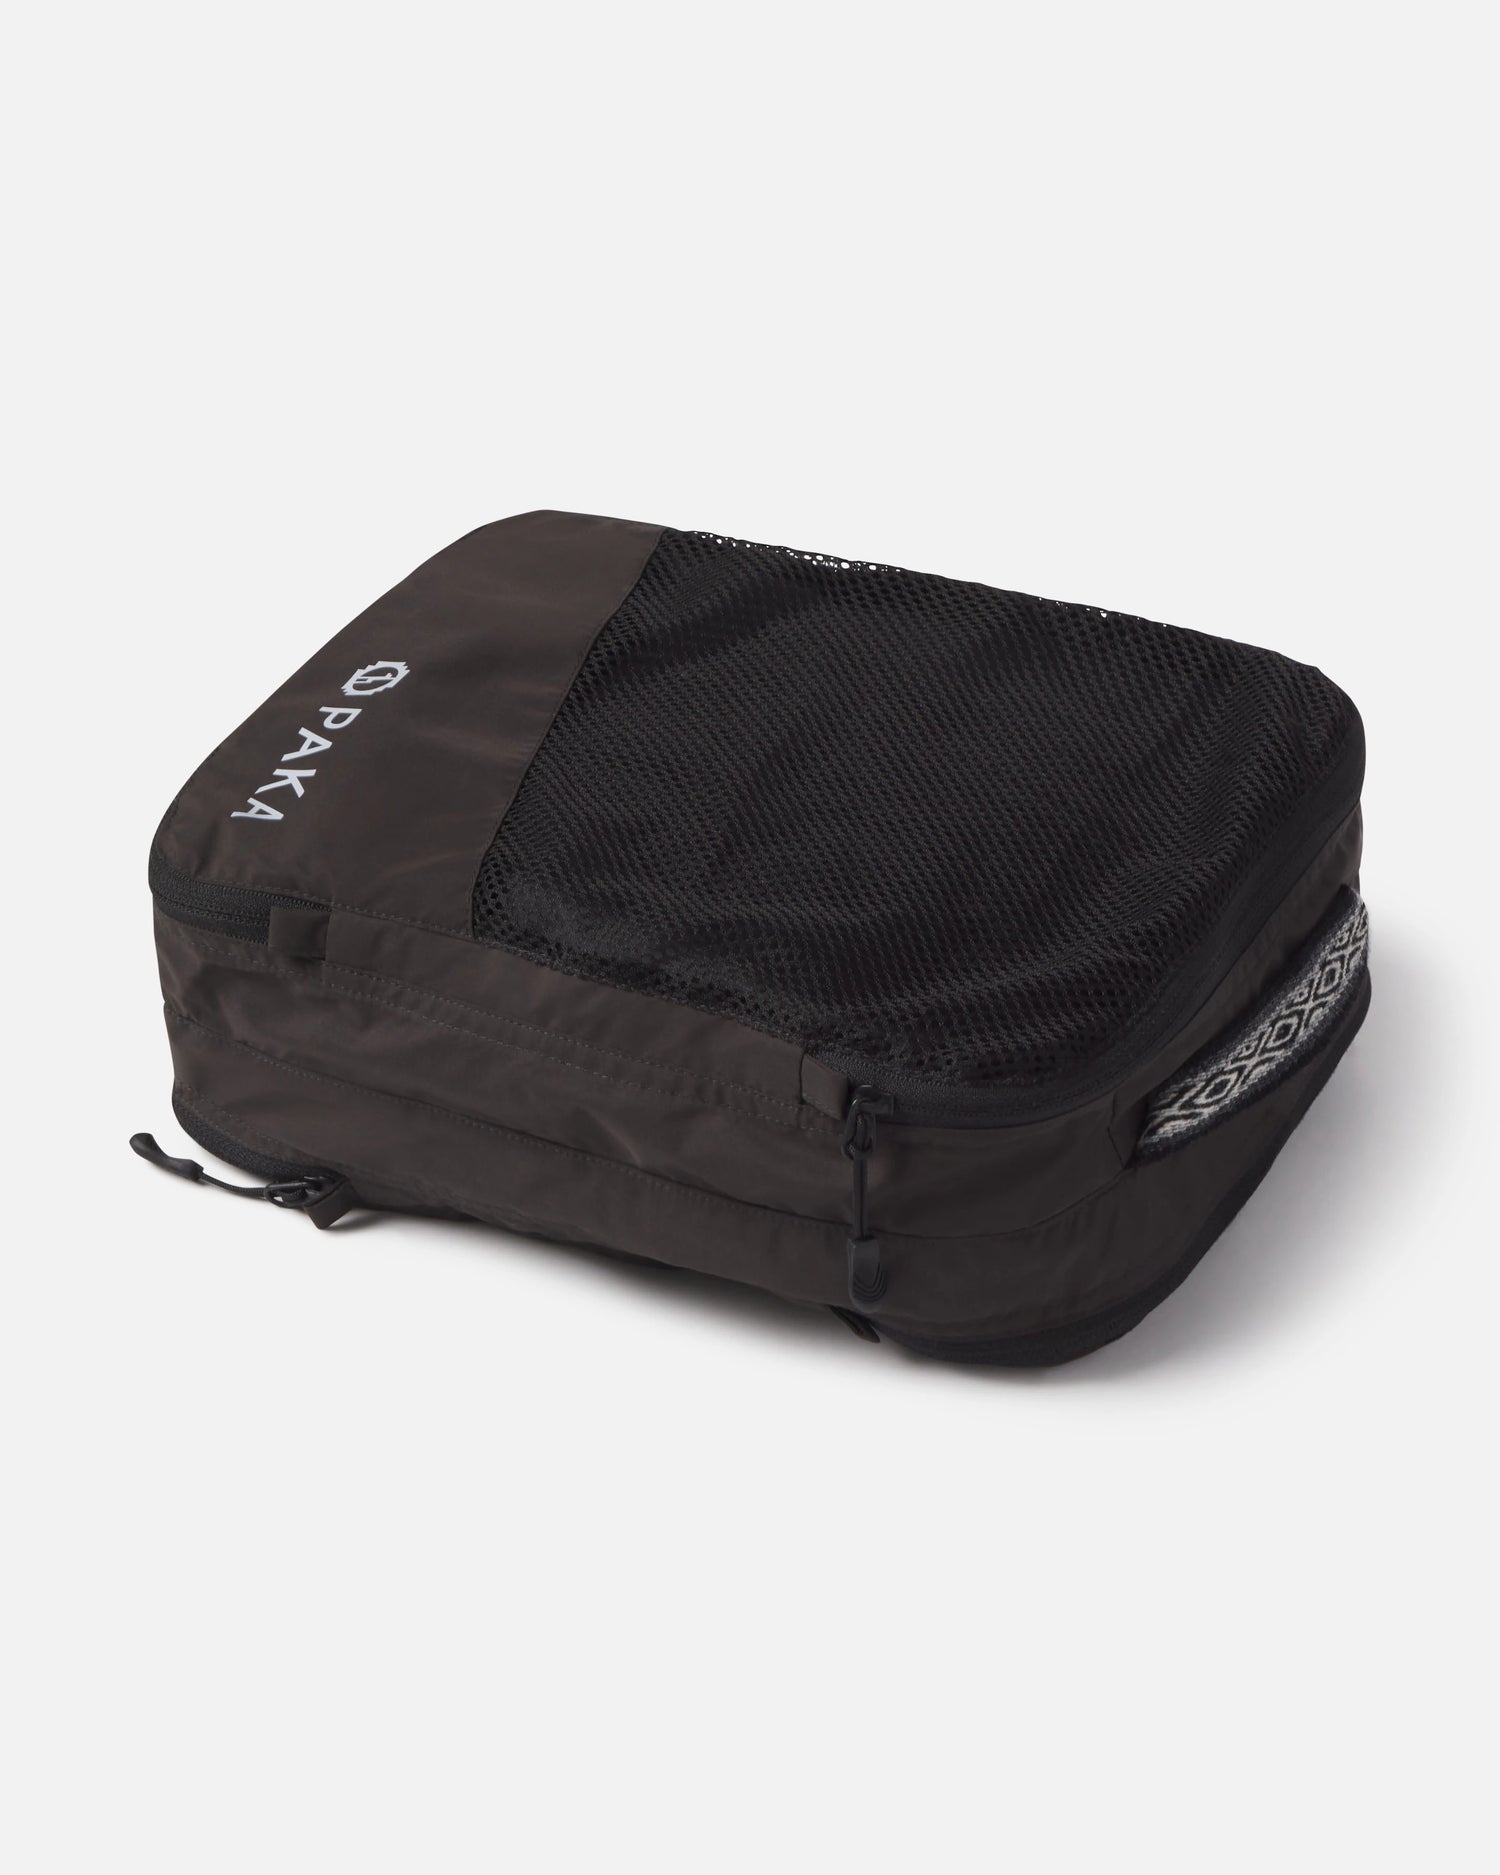 Black Packing cube with hand woven inca ID and mesh pocket